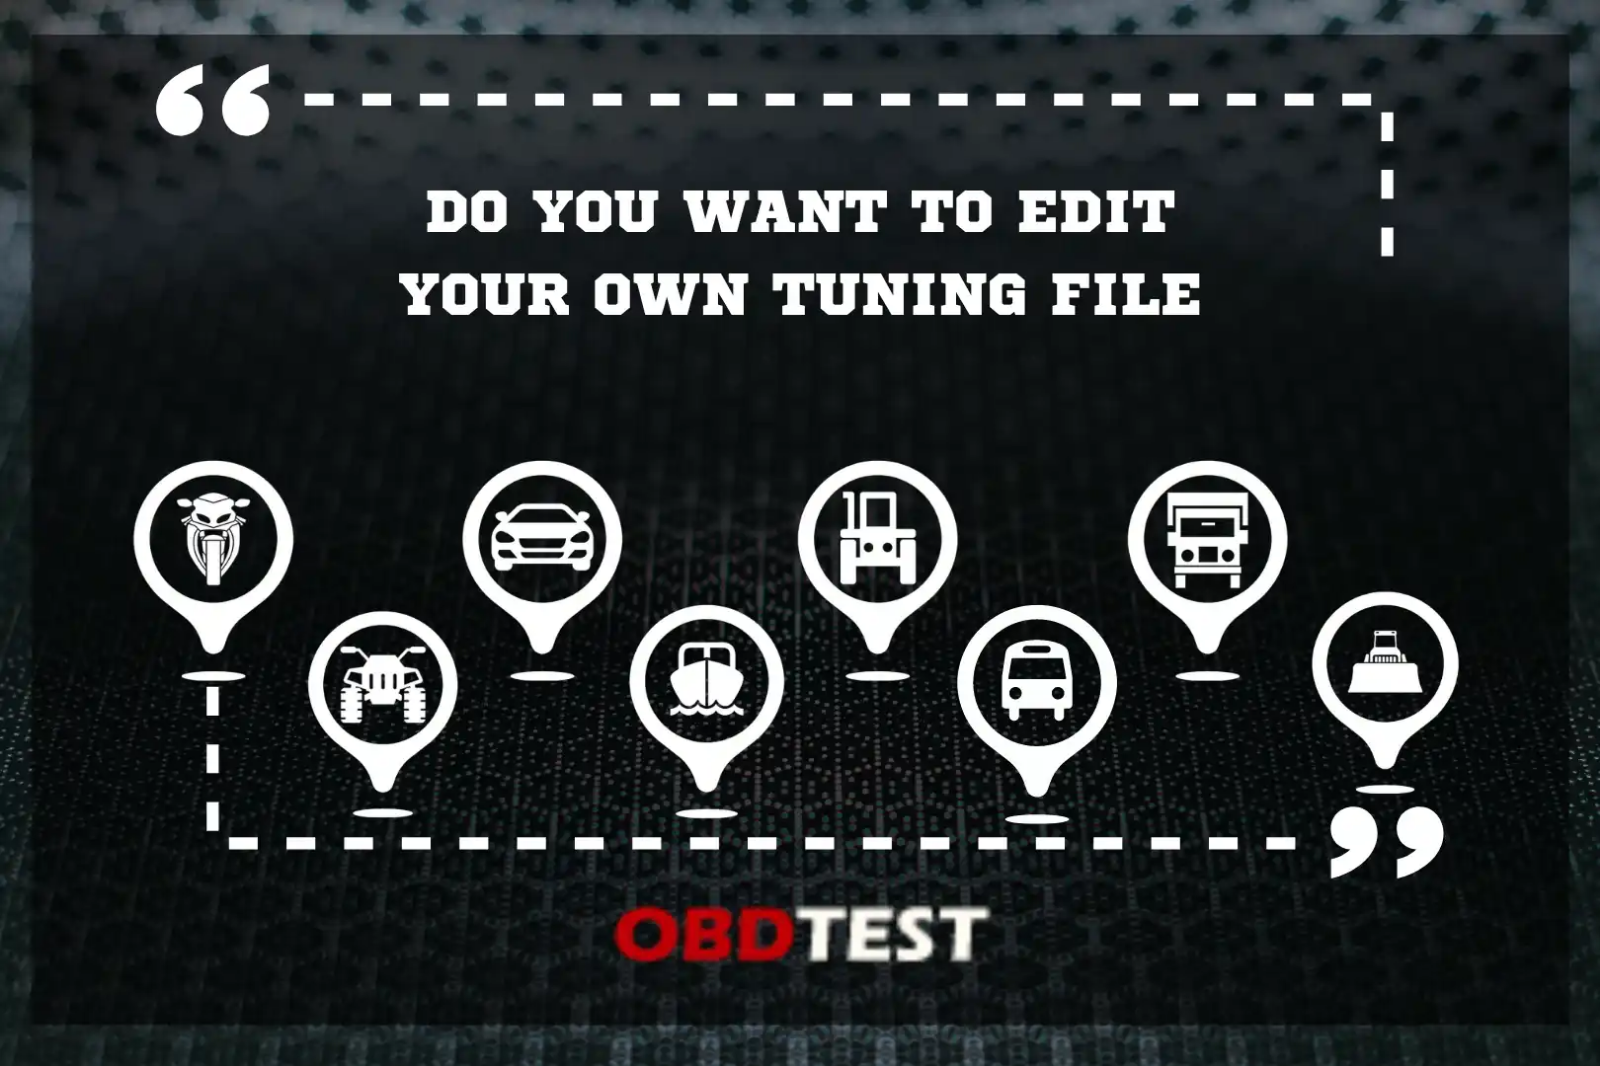 Do you want to edit your own tuning file?